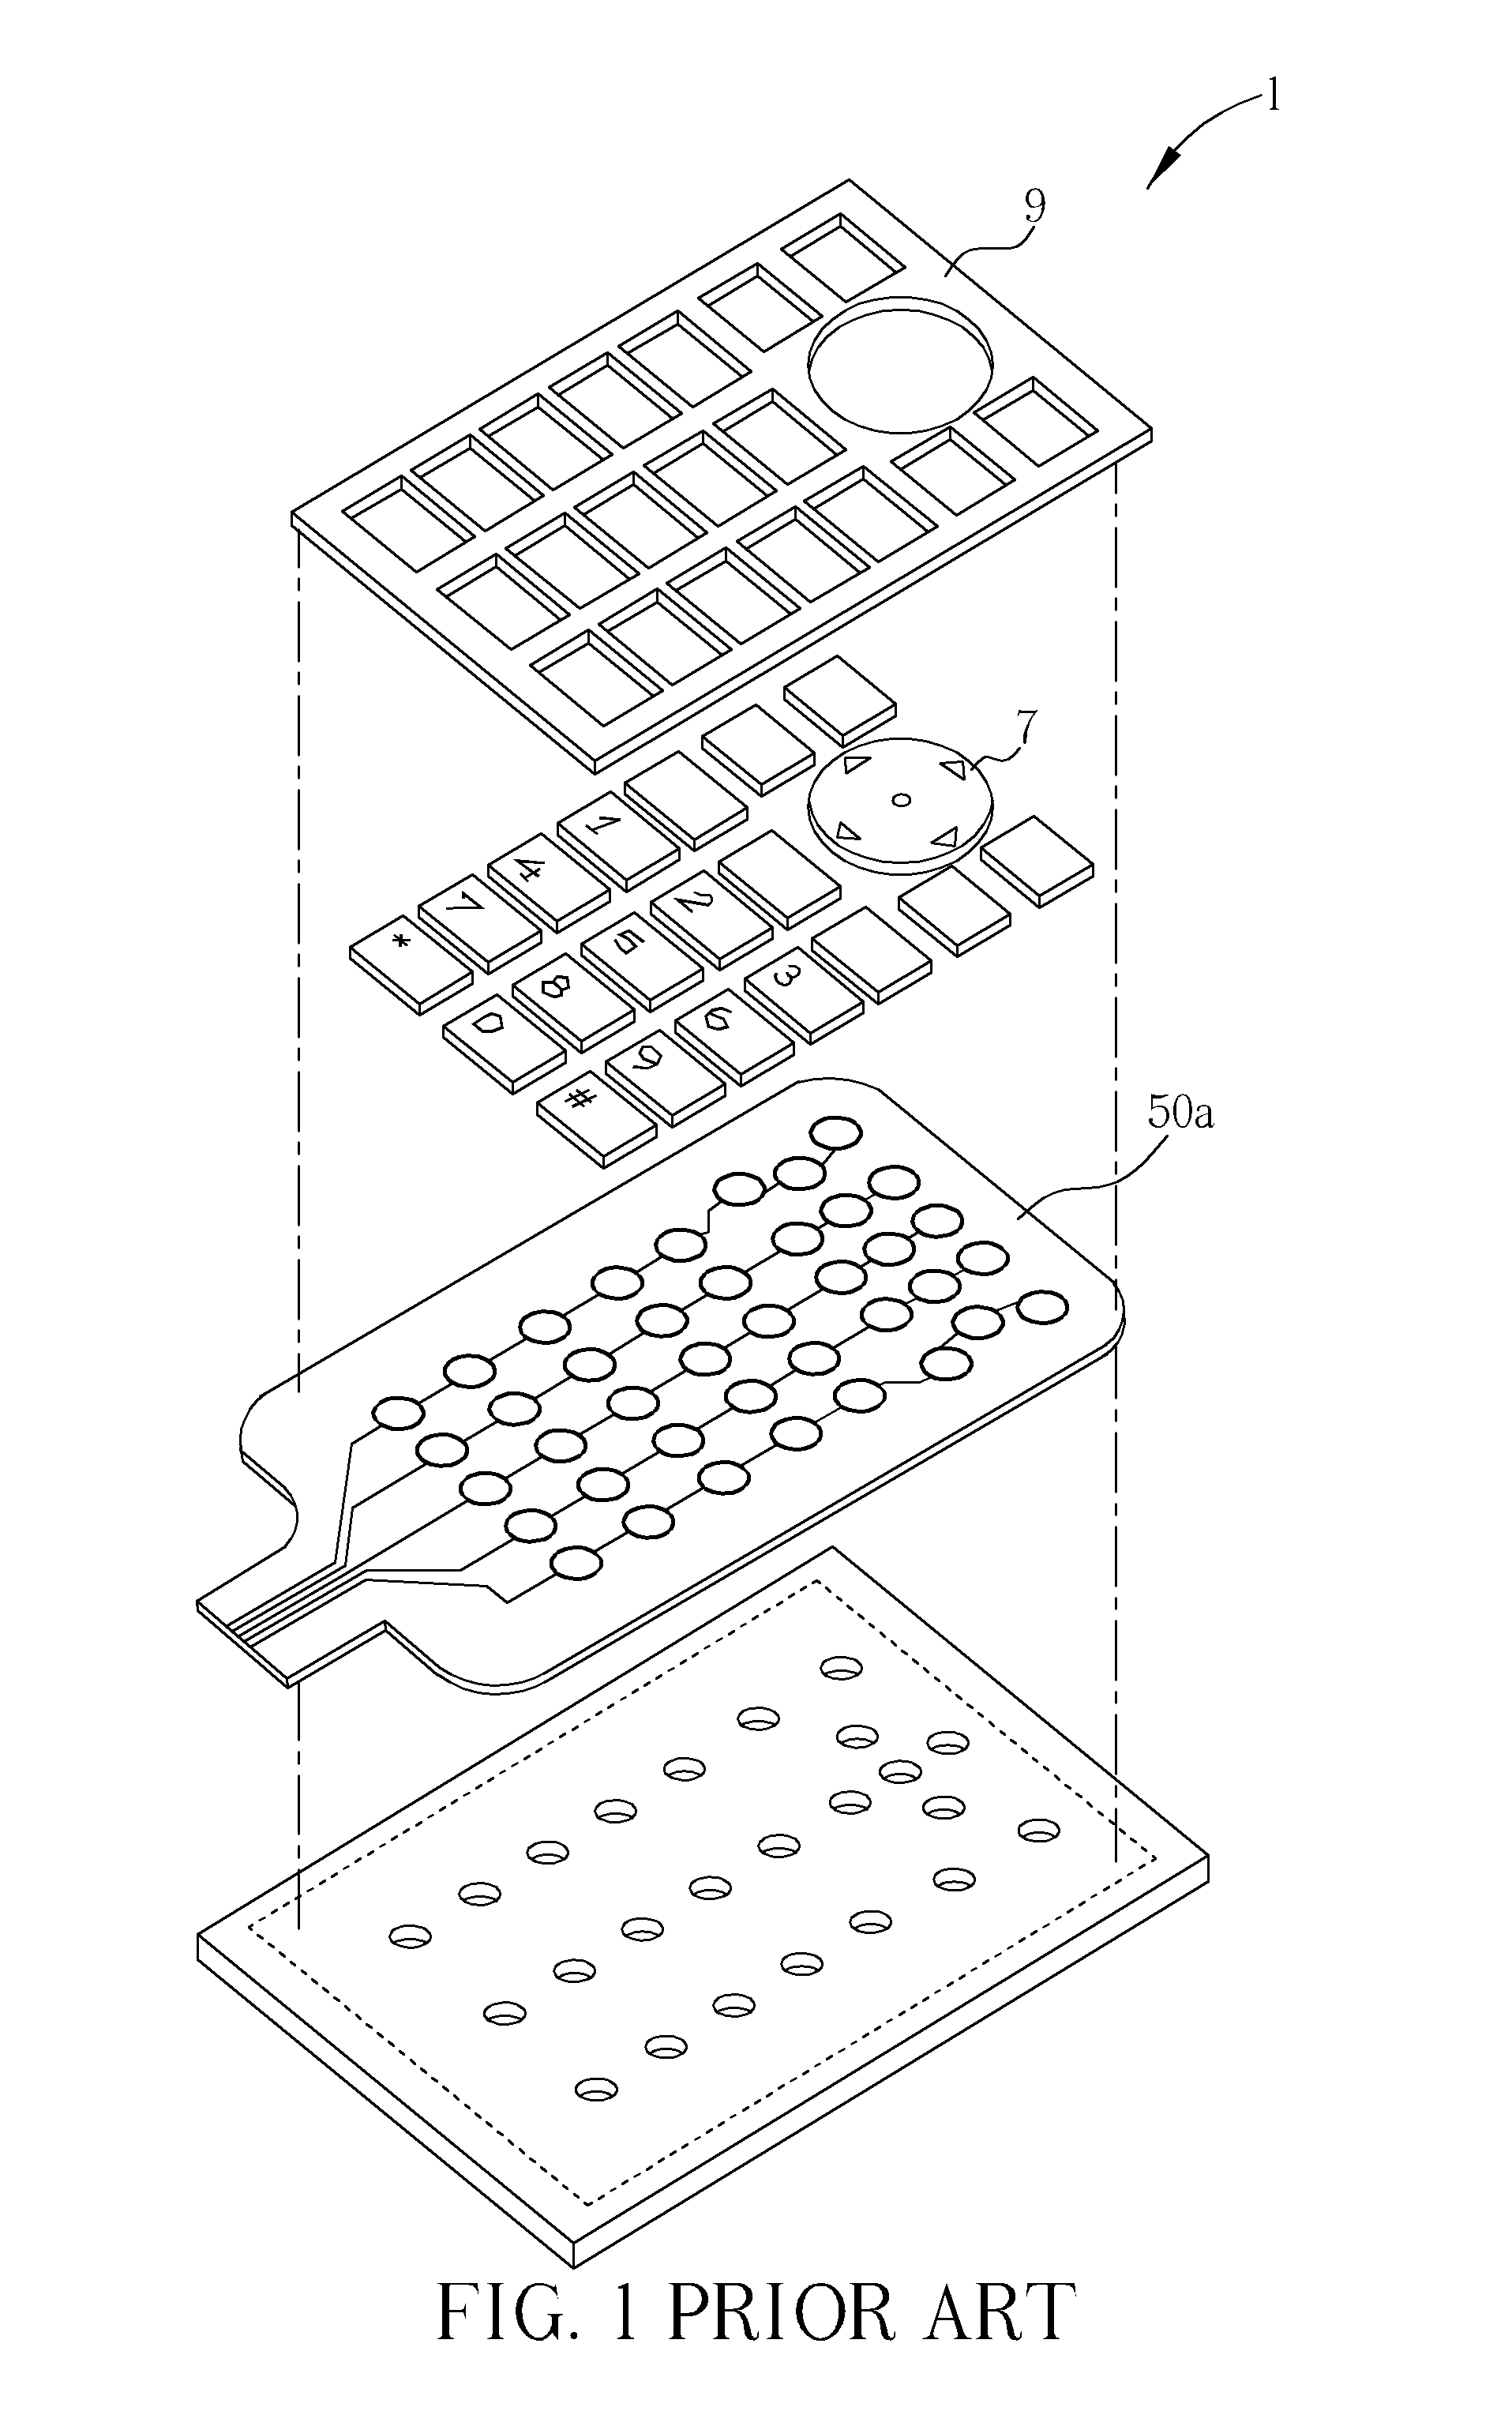 Mechanical keypad with touch pad function